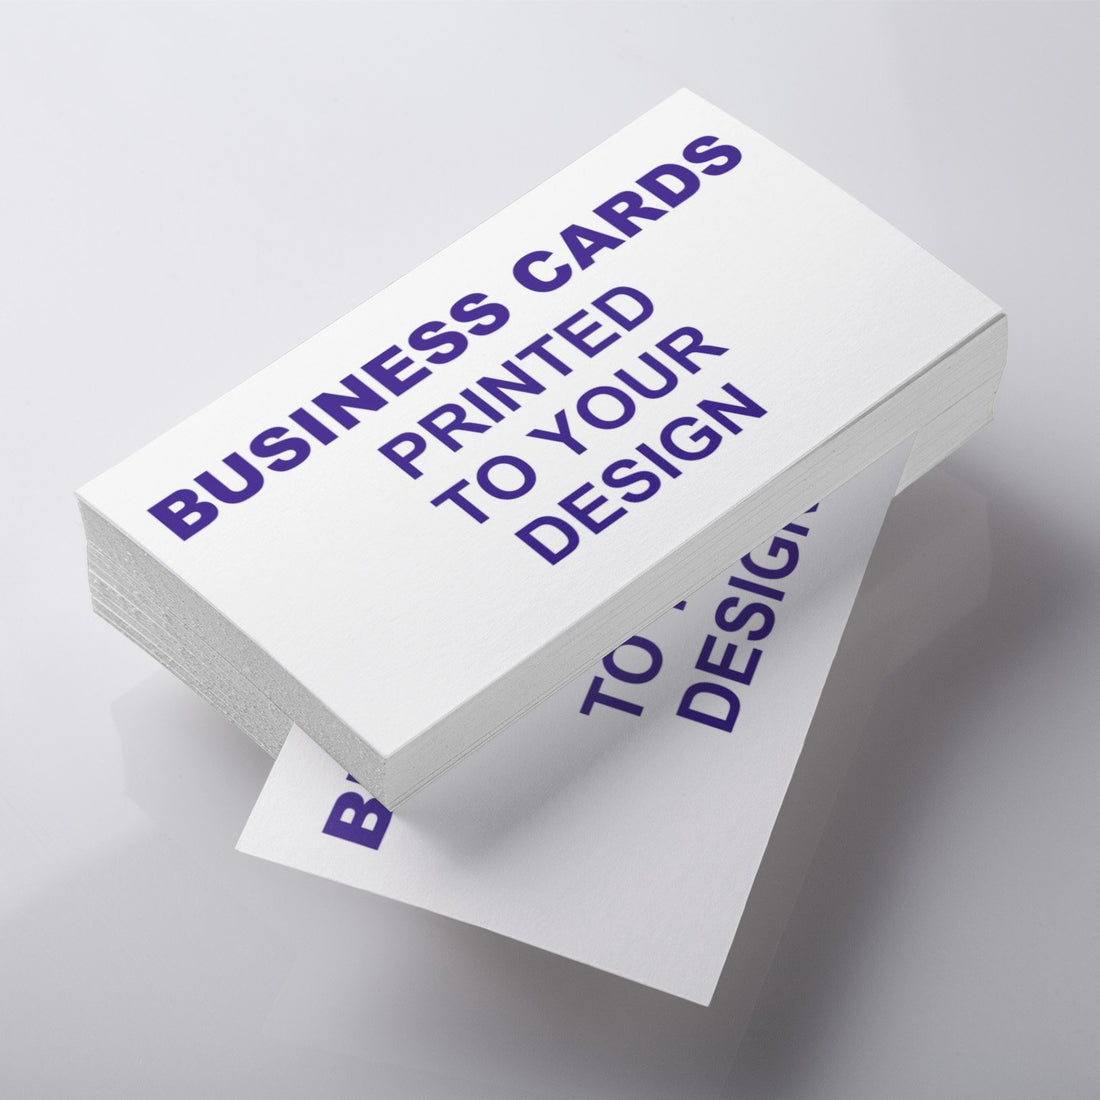 Would You Like 500 FREE Business Cards?